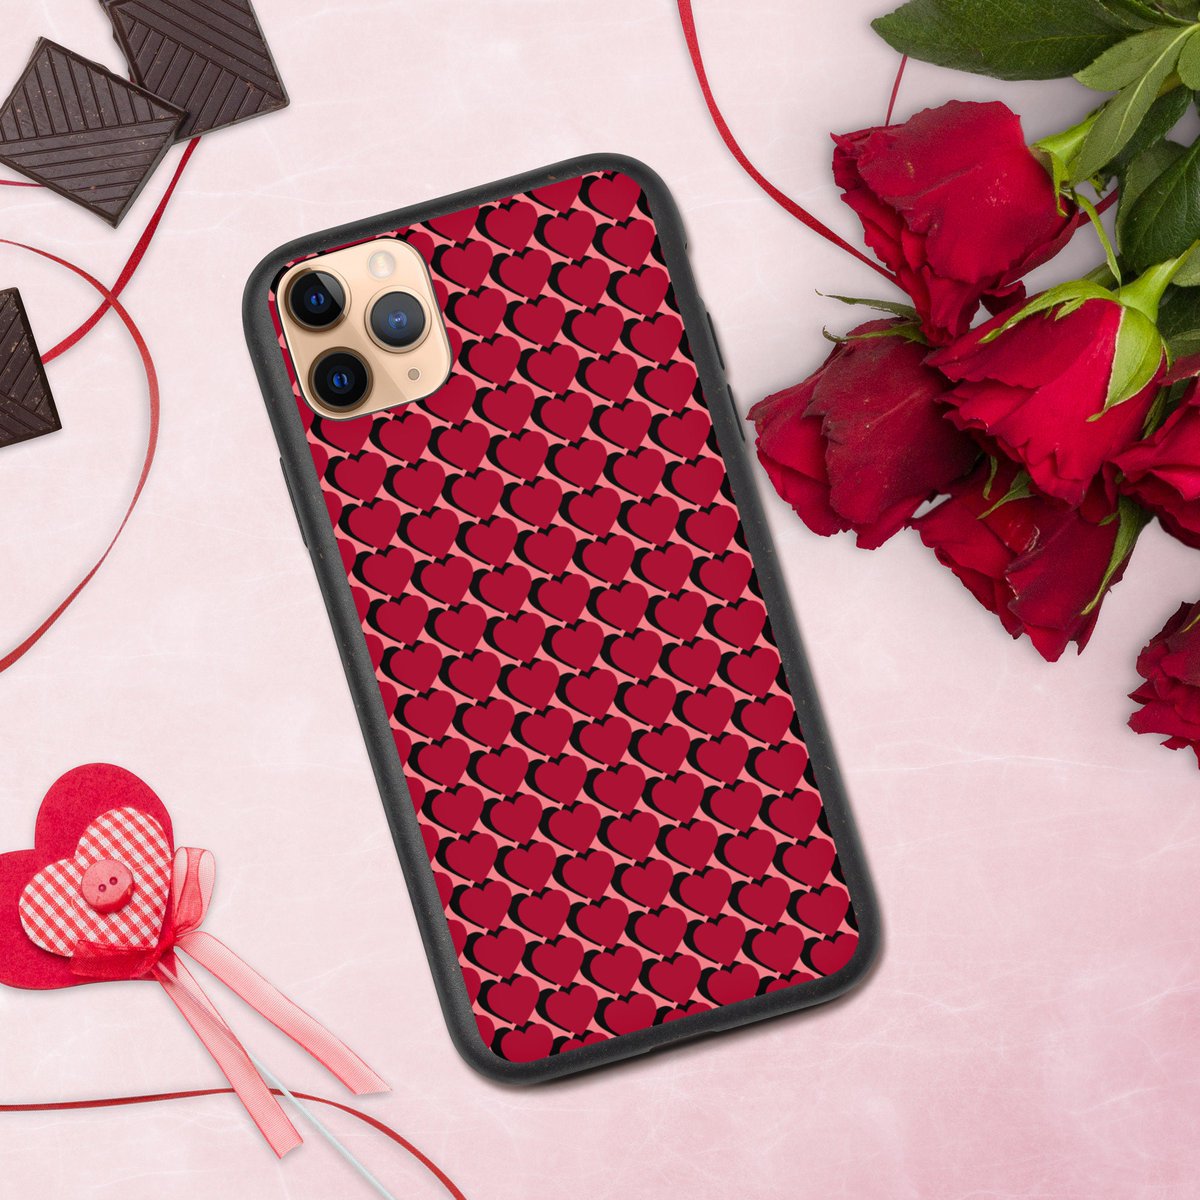 Excited to share the latest addition to my #etsy shop: Heart iPhone case, Valentines Day Gift, For Her, For Him, Unisex, Iphone 13 - 11 etsy.me/3XOEwrM #engagement #valentinesday #check #lovefriendship #iphonecase #iphone12case #iphone13case #iphone11case #ipho